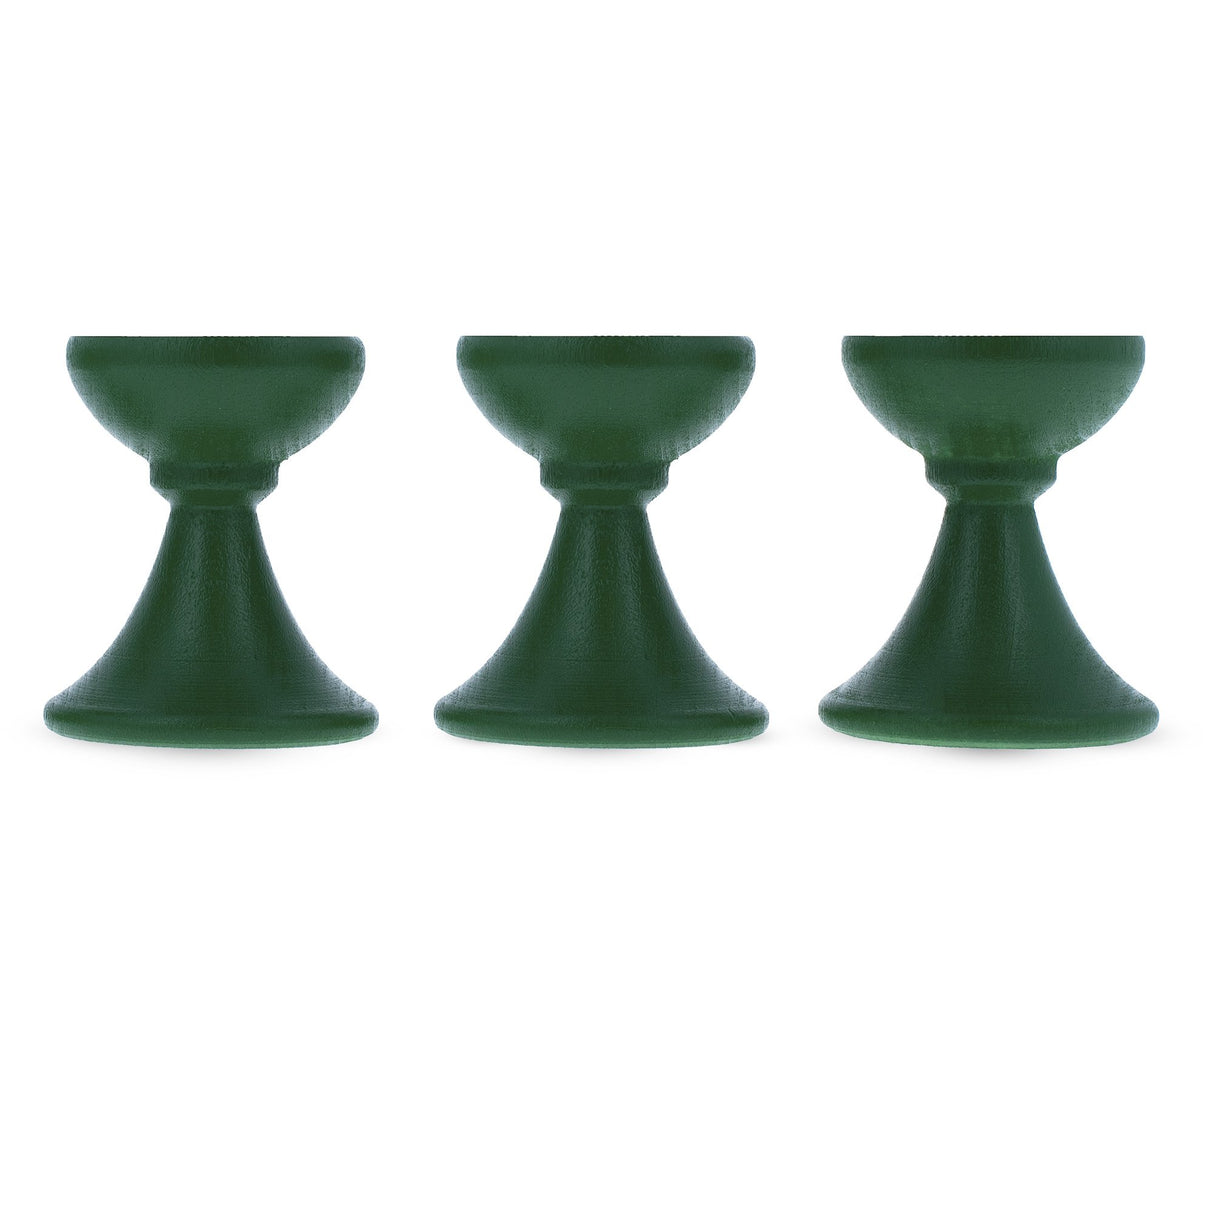 Wood Set of 3 Green Wooden Egg Stands Holders Displays 1.4 Inches in Green color